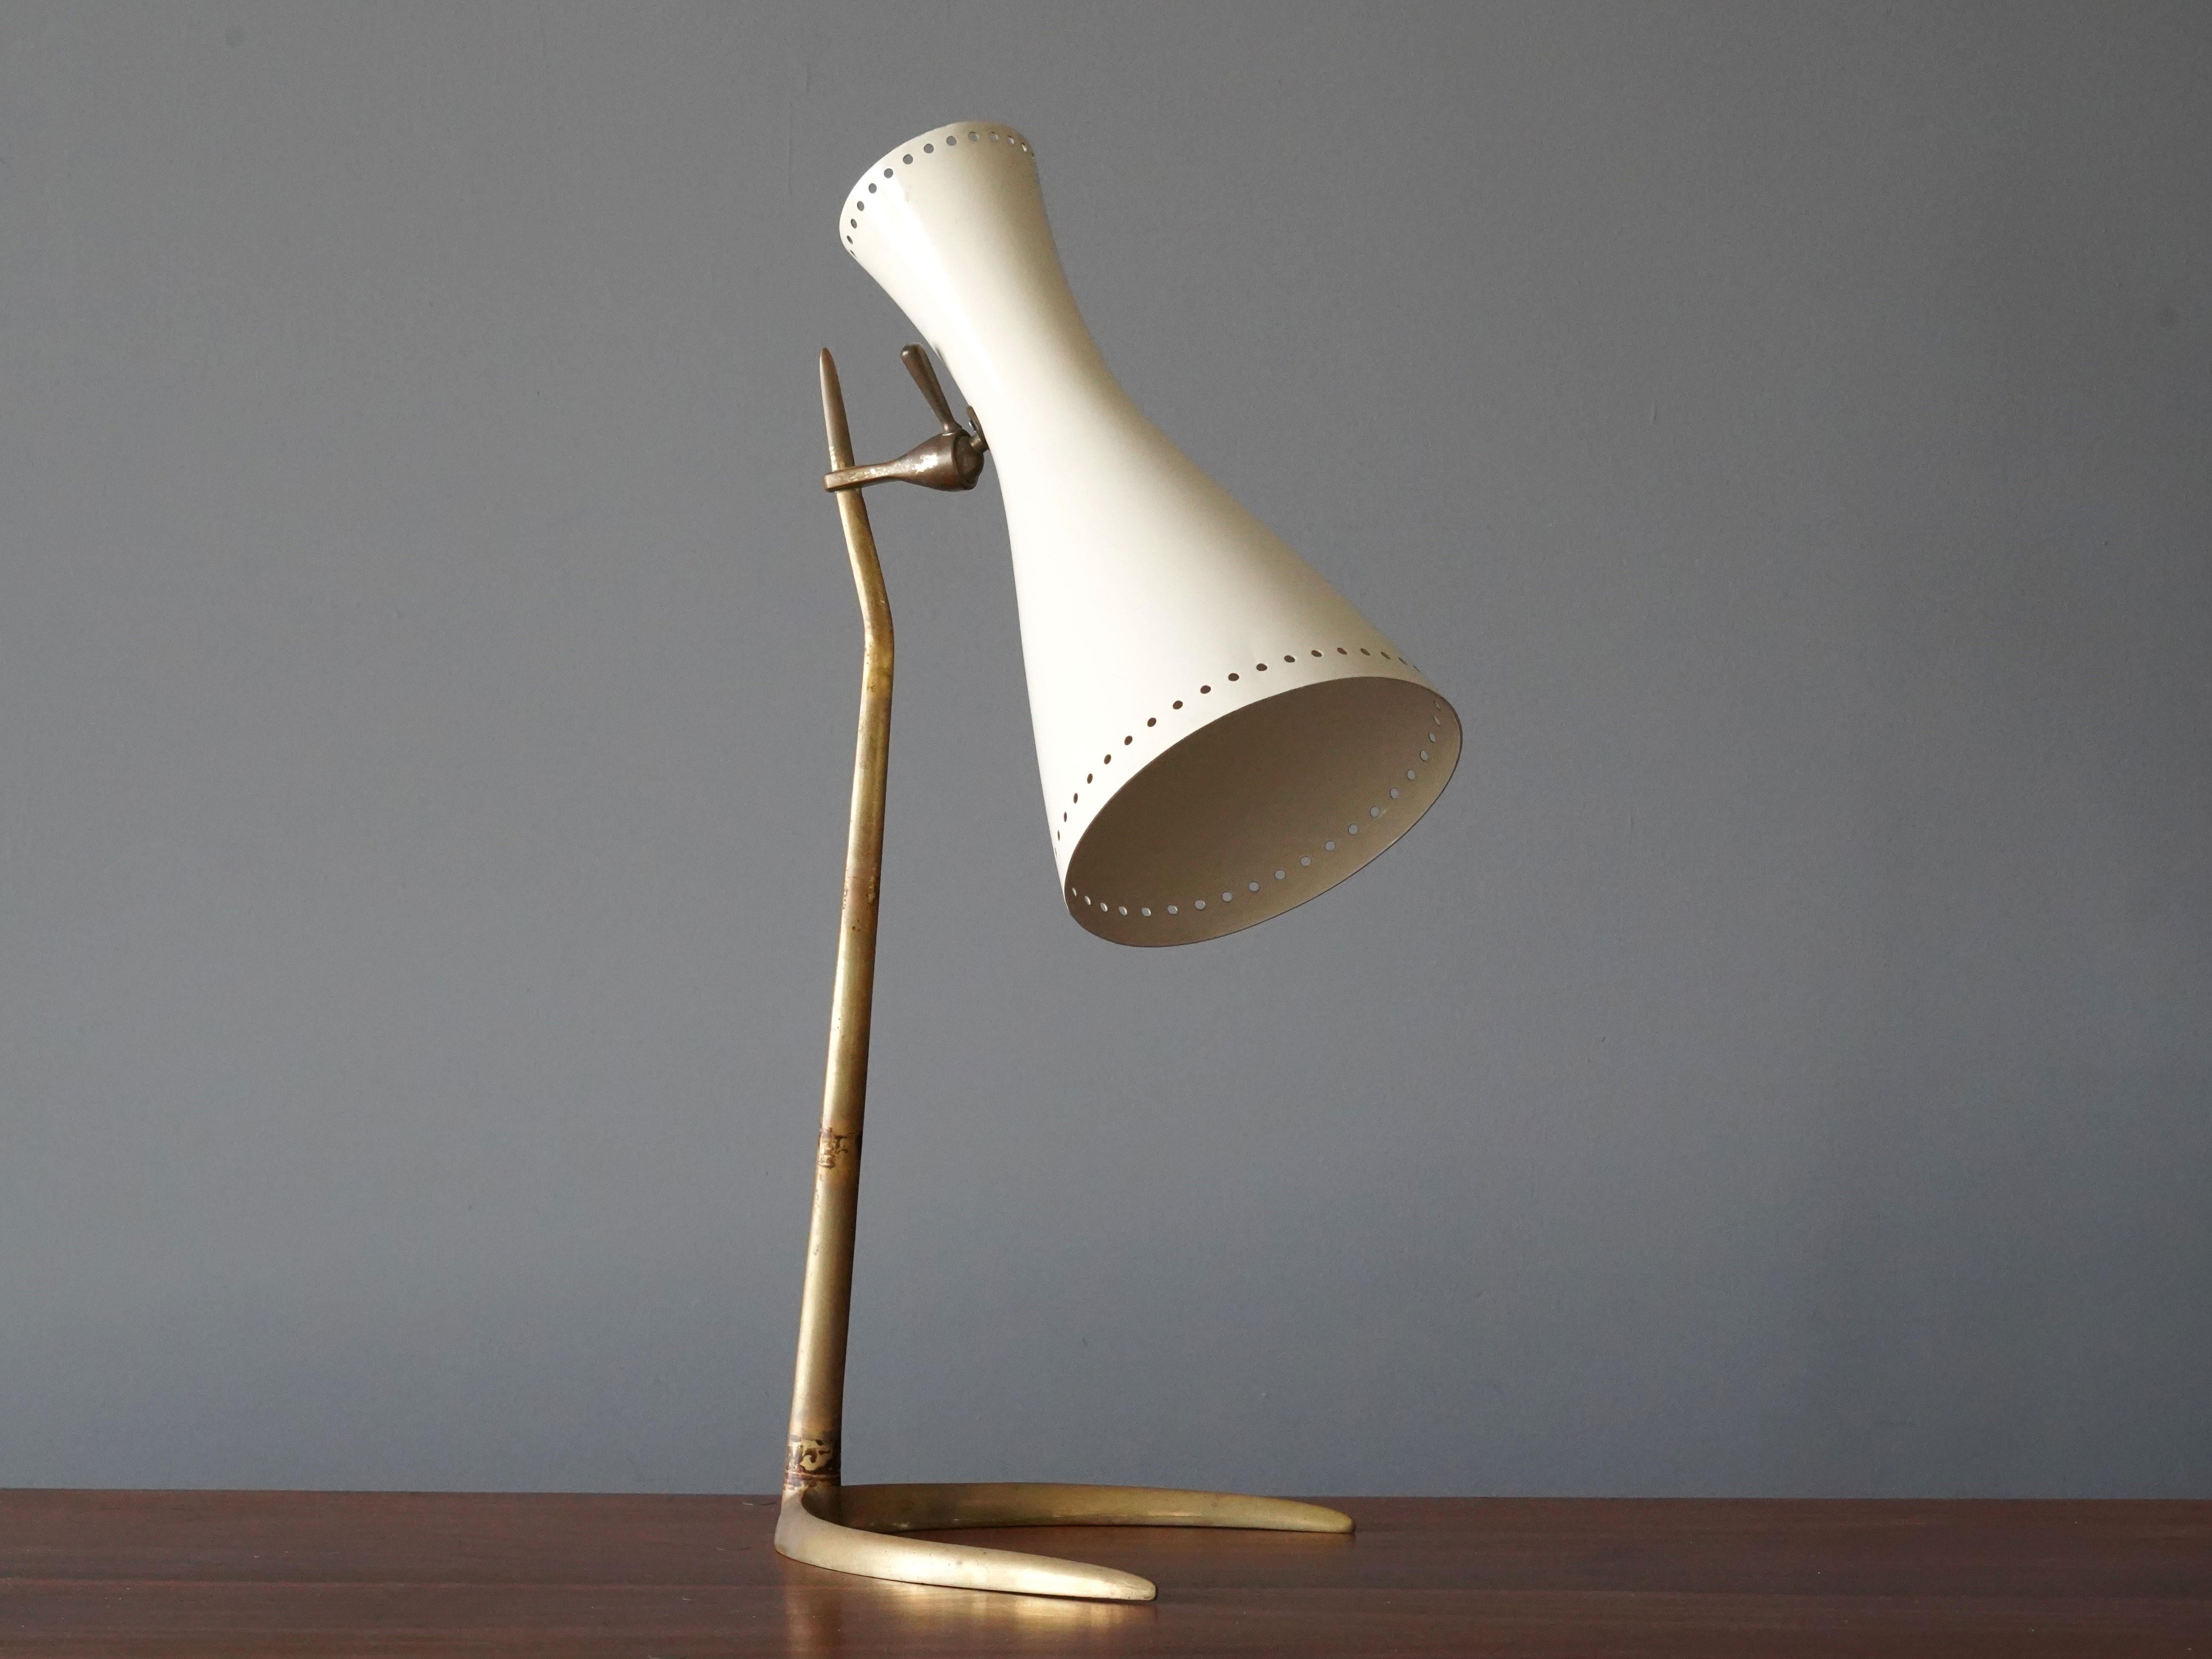 A highly modernist table lamp / desk light. Designed by an unknown Italian designer. Produced in Italy, 1950s. Features a sculpted brass base, perforated lacquered metal screen. 

Other Italian lighting designers of the period include Angelo